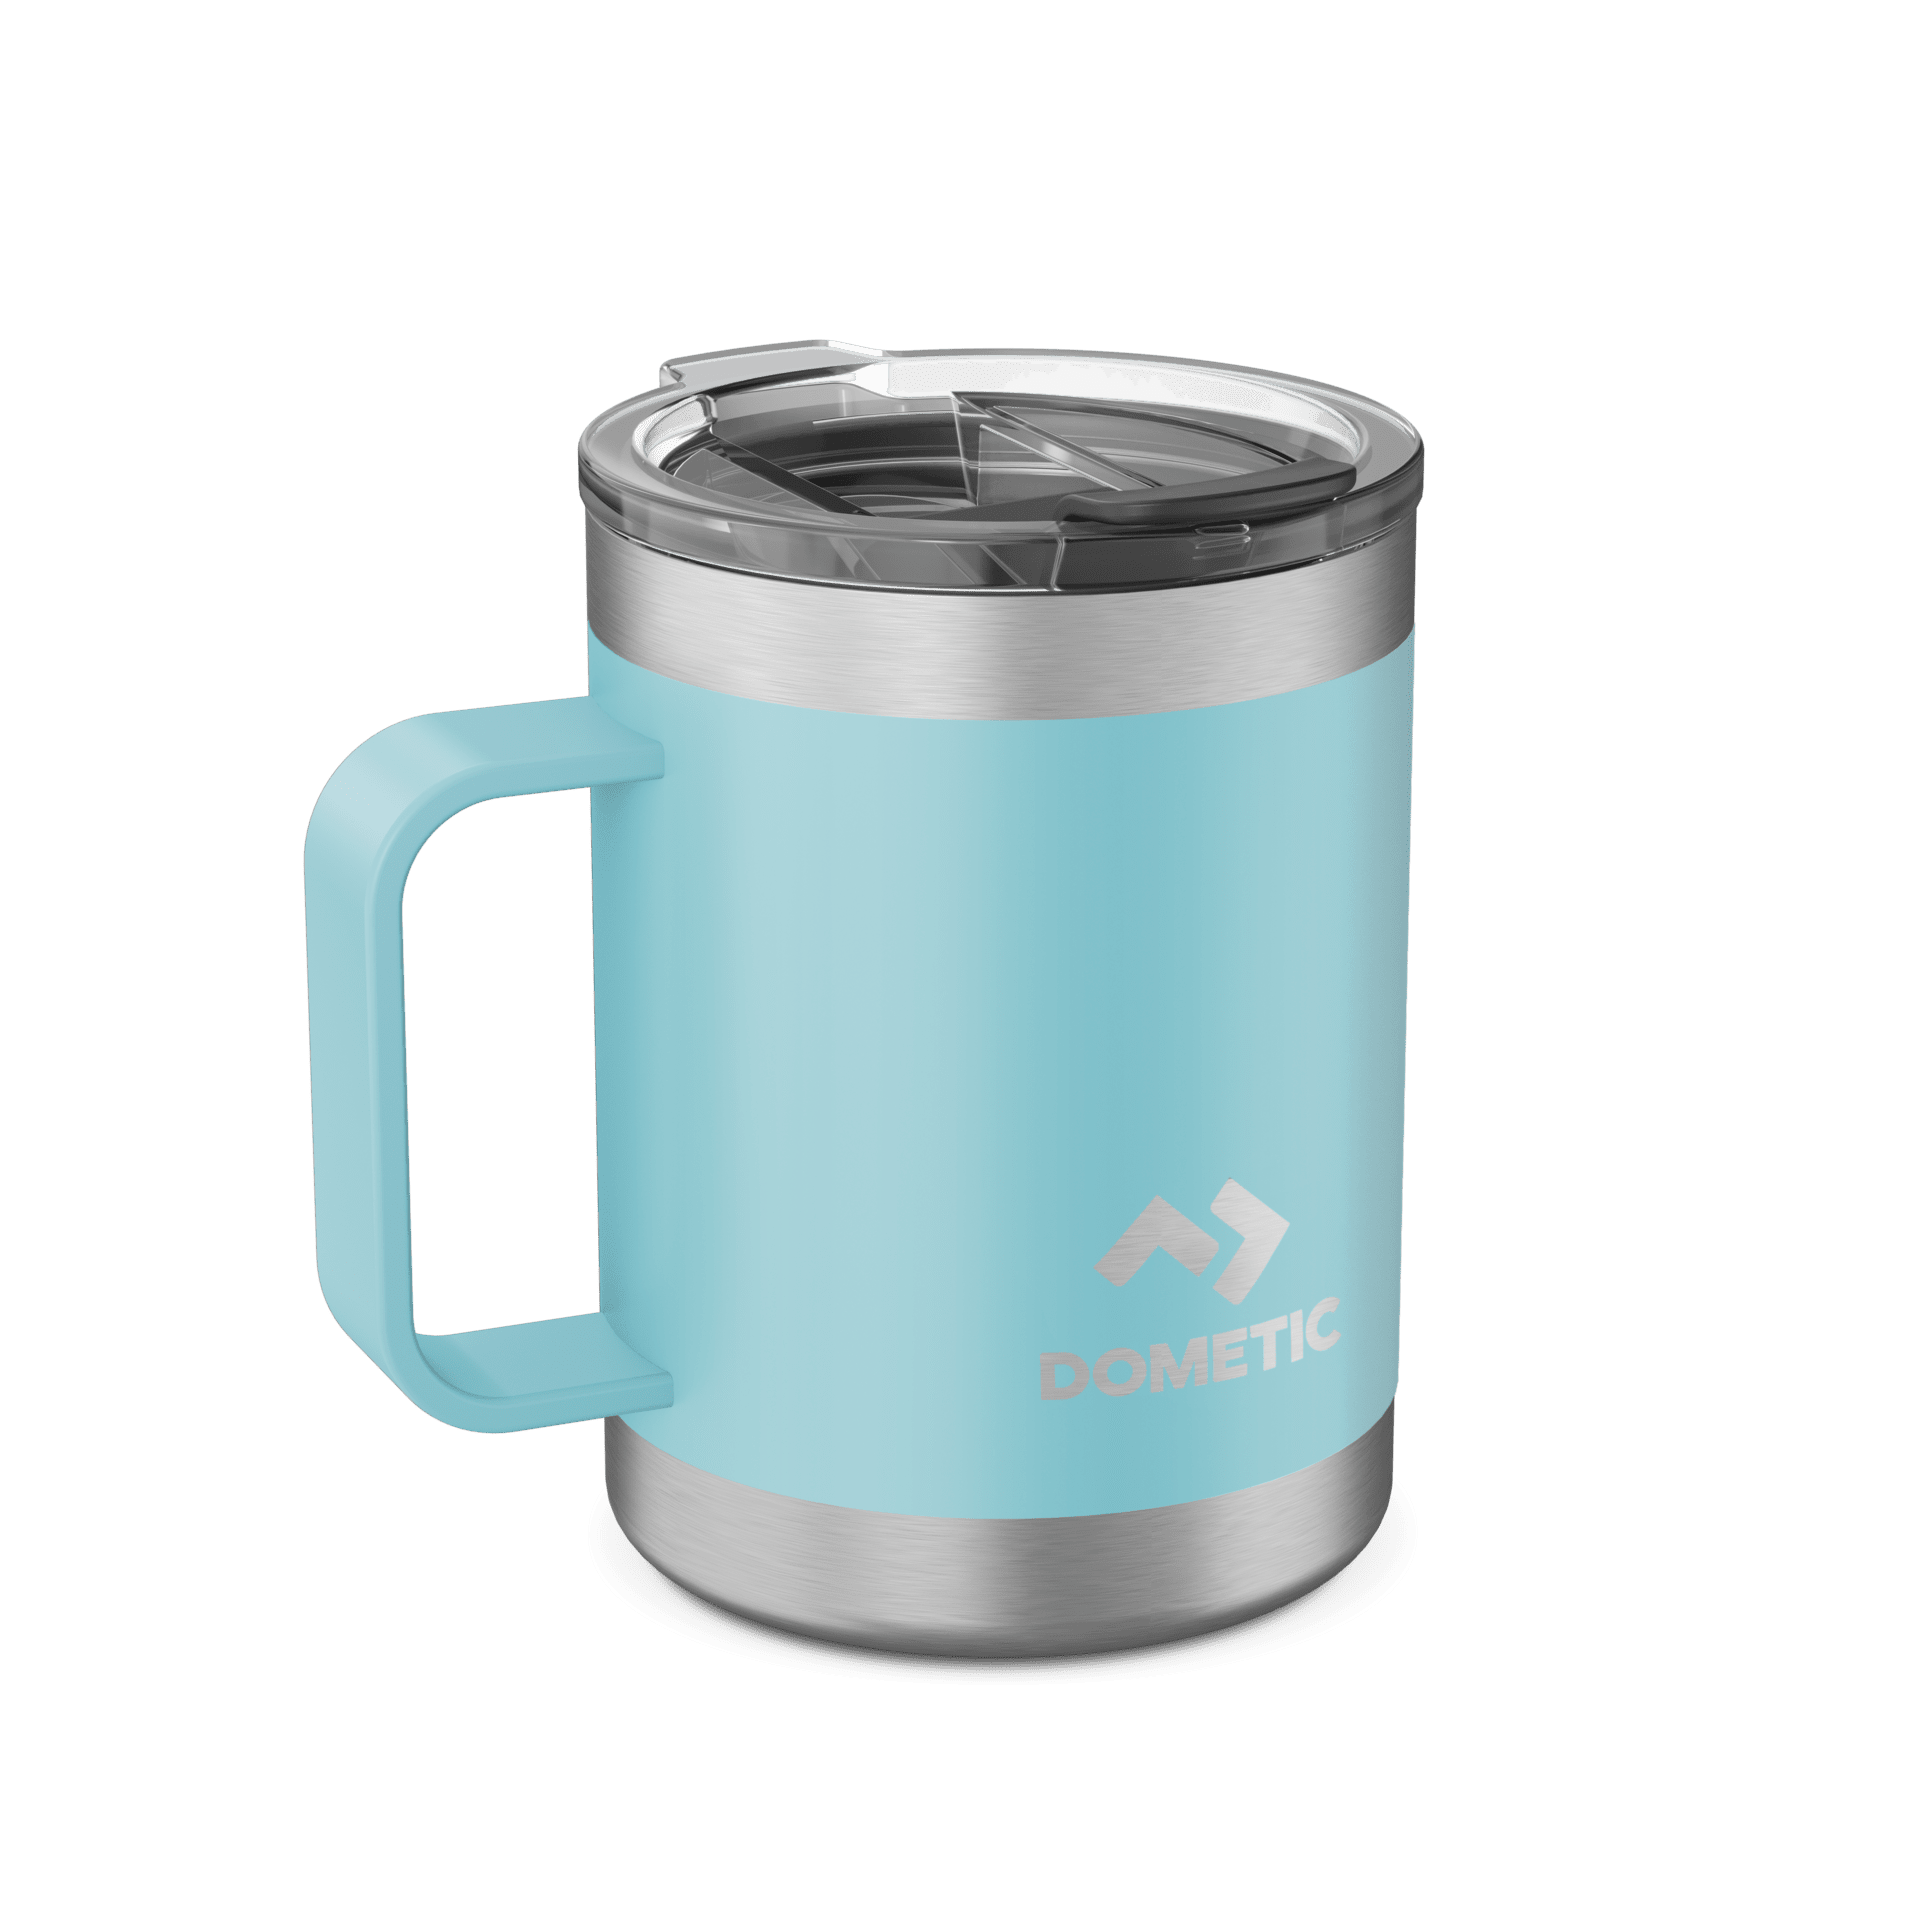 https://www.dometic.com/externalassets/dometic-thermo-mug-45_9600050957_90717.png?ref=2137834297